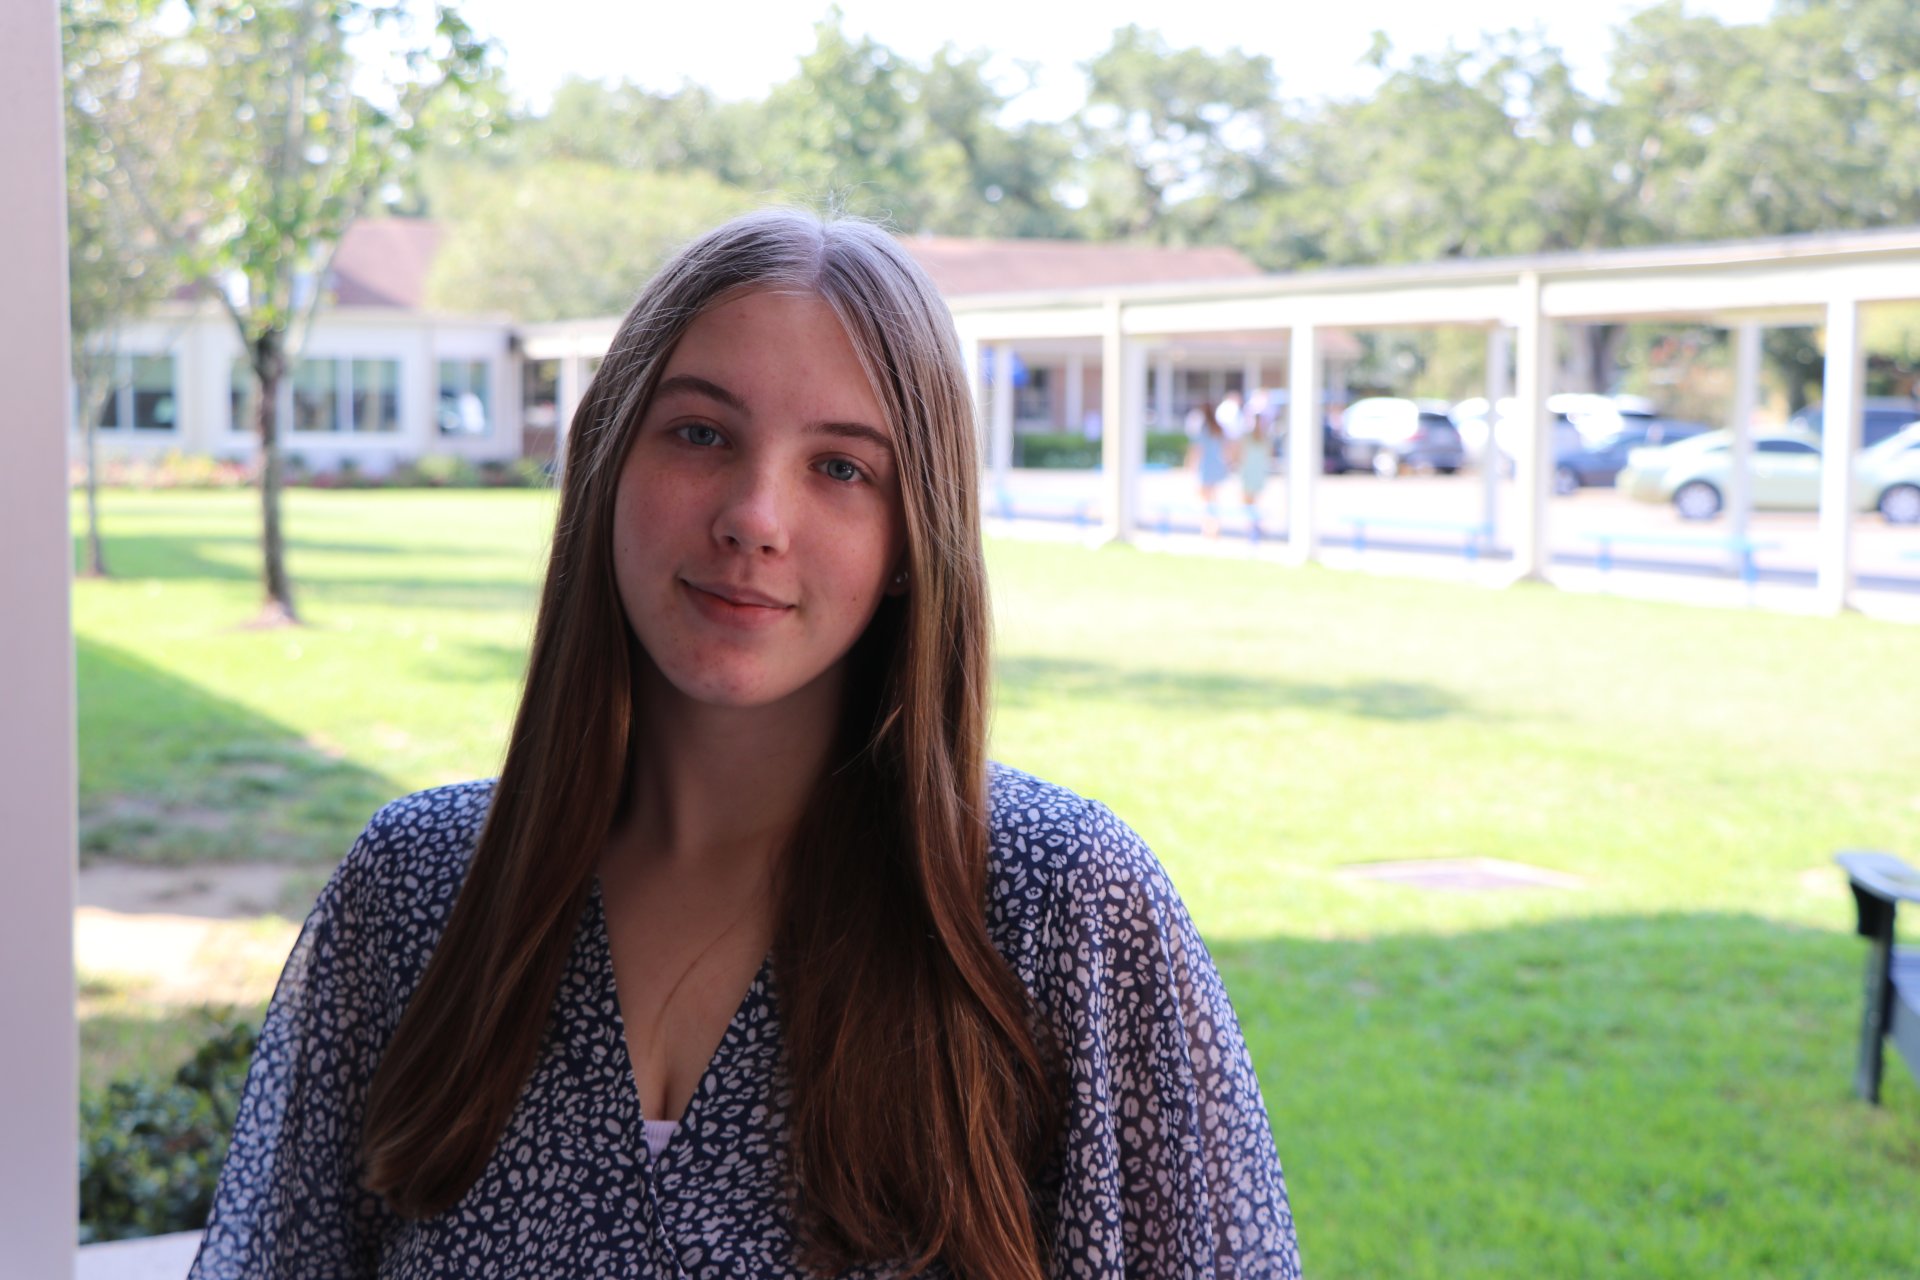 A Place to Call Home “St. Martin’s has a very special place in my heart, since I’ve been at this school since I was six months old. It means so much to my family, too, as I’m a 3rd generation StM student!” Ella Bozeman ’25